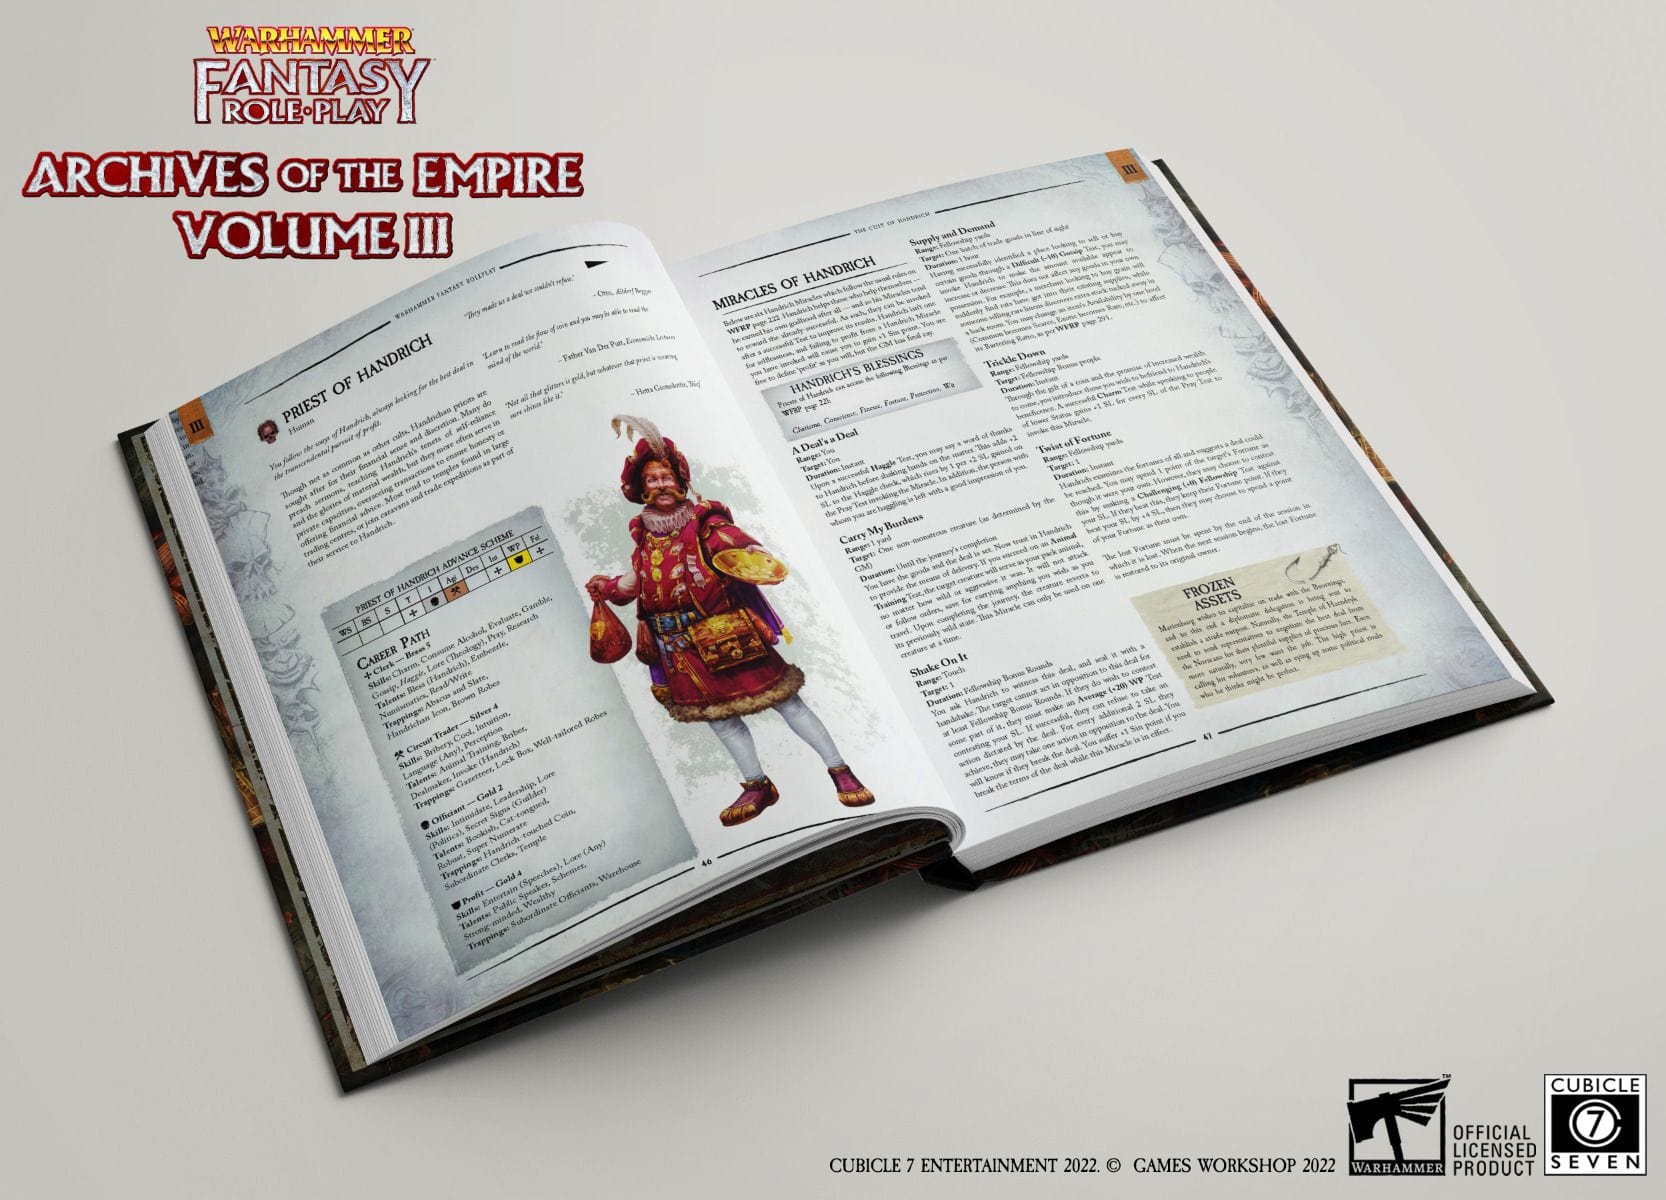 Warhammer Fantasy RPG: Archives of the Empire Vol 3 - Saltire Games